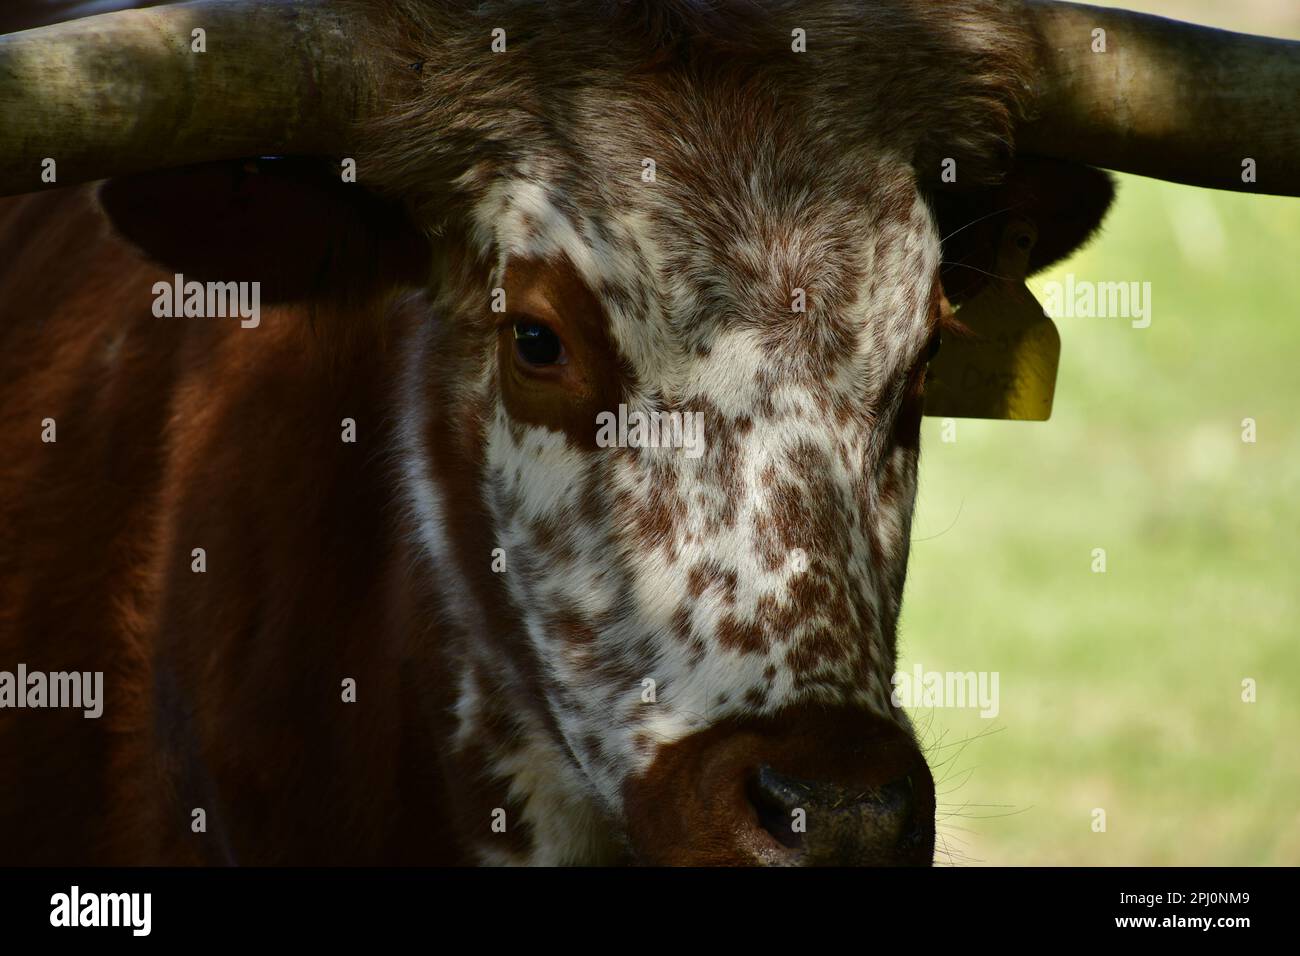 A close up of a longhorn cow with a  brown spotted face in the shade with a yellow ear tag and brown body with a green blur of grass Stock Photo